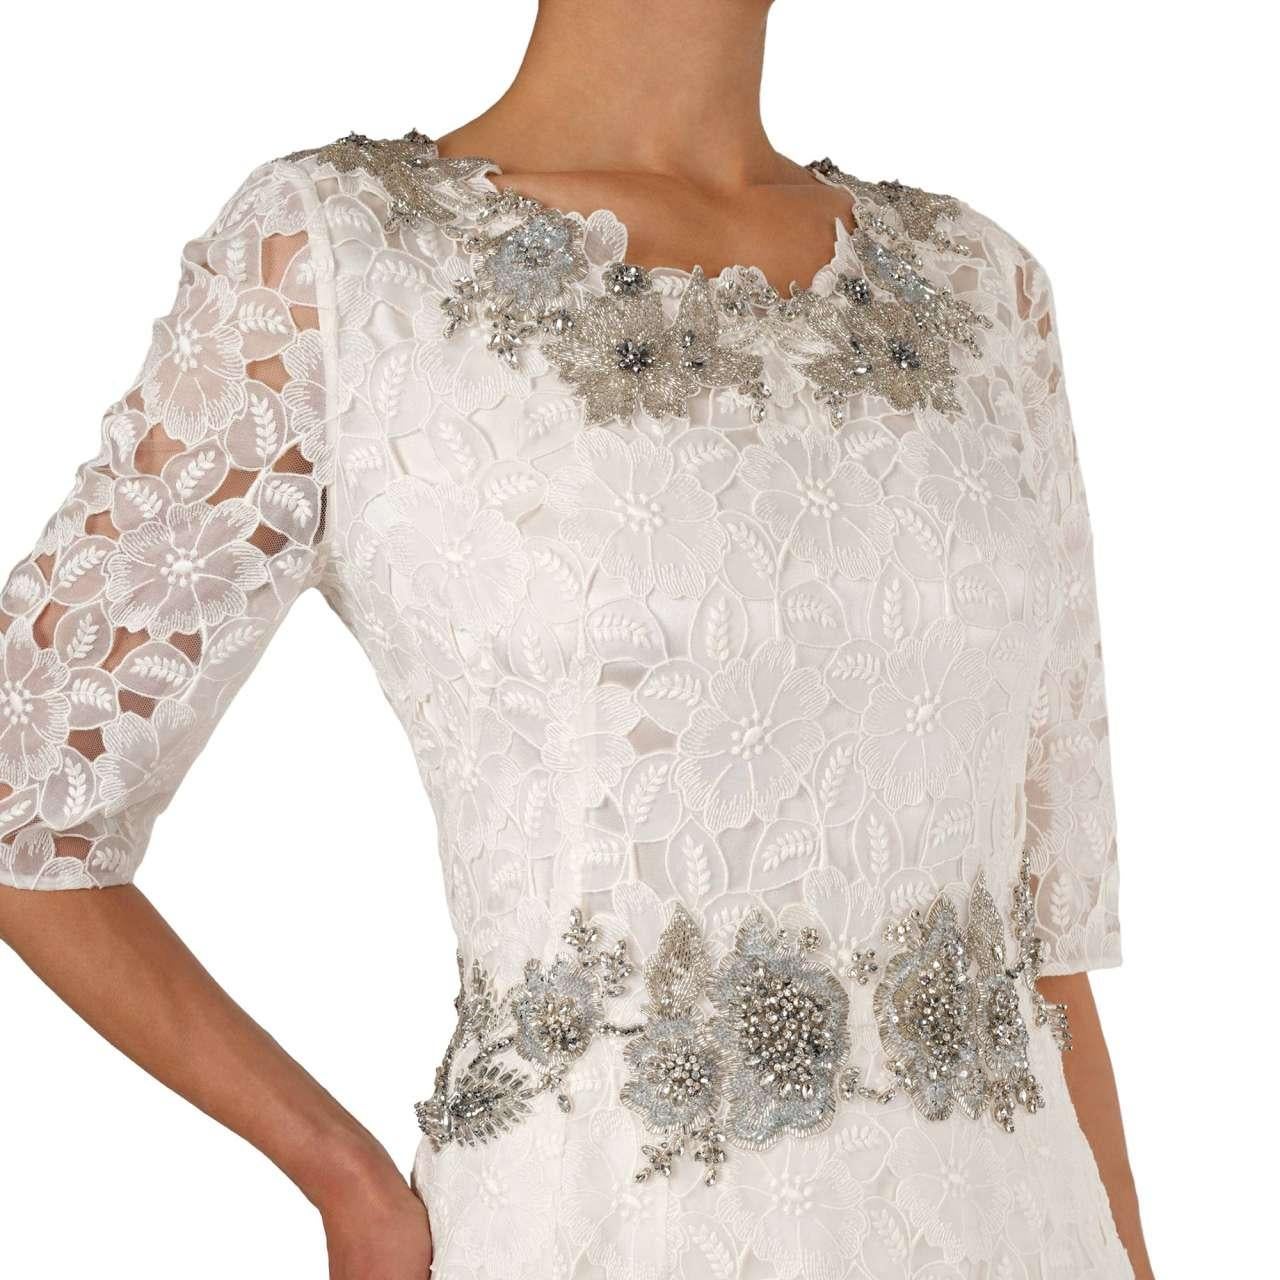 - Silk blend long wedding dress with floral lace, silk lining, pearls and crystal embroidery applications in silver and white by DOLCE & GABBANA - MADE IN ITALY - New with Tag - Concealed back zip closure - Long - Fitted waist - Silk lining with